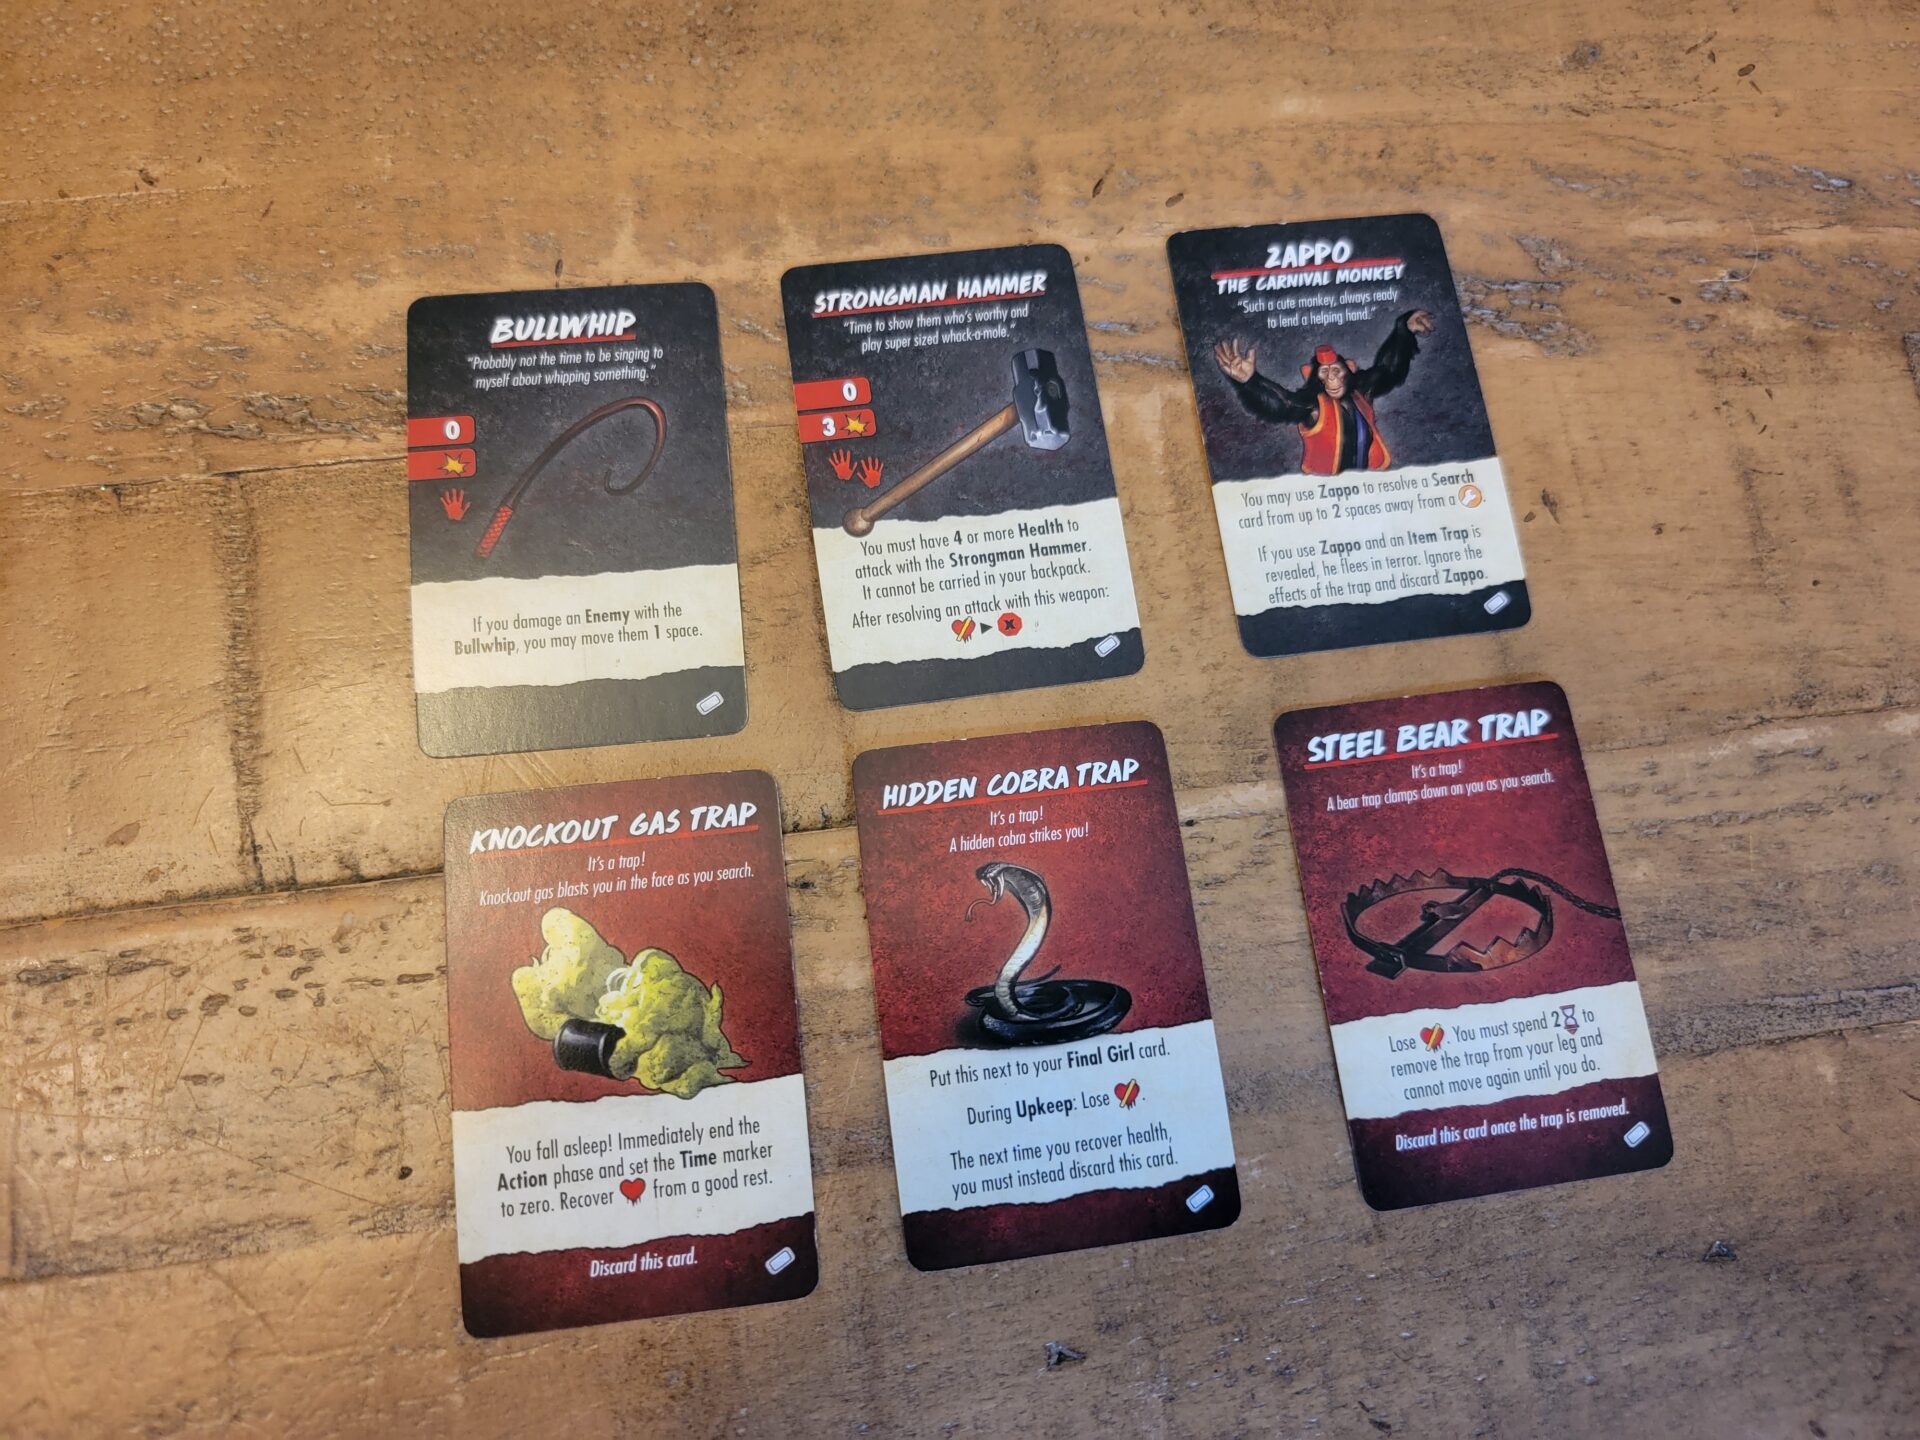 Final Girl Carnage at the Carnival event and item cards.